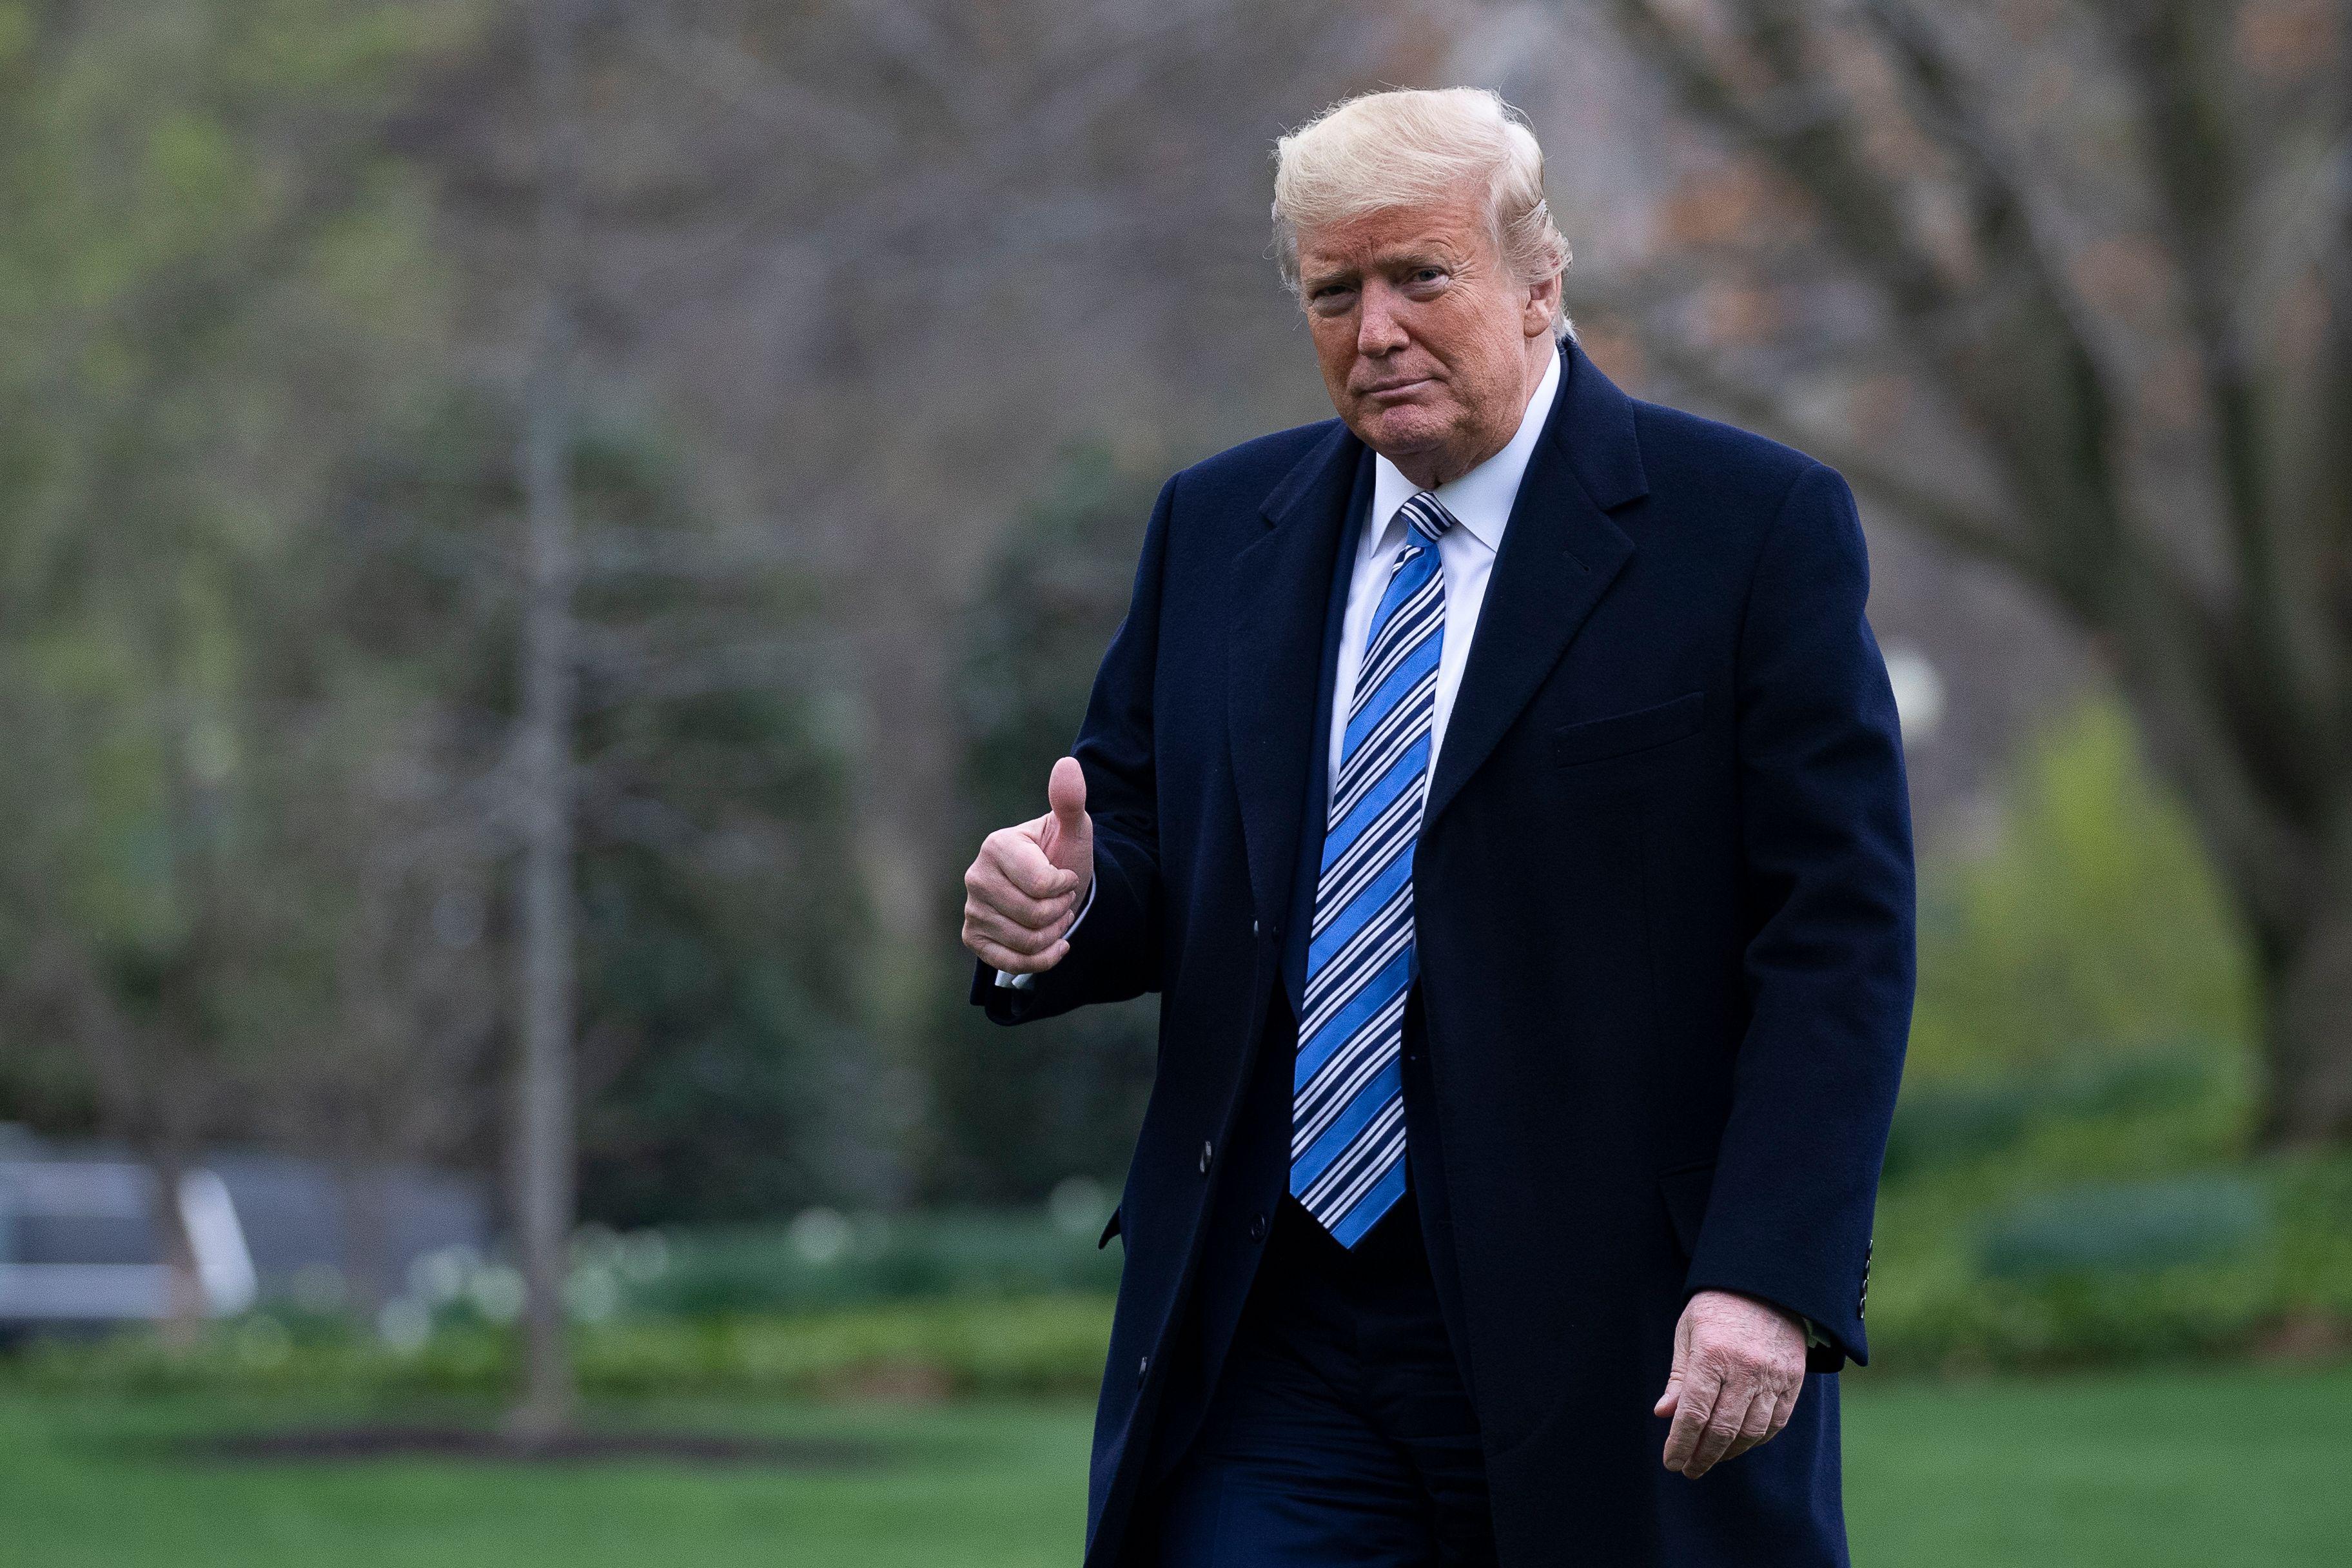 President Donald Trump returns to the White House in Washington, D.C. on March 28, 2020.